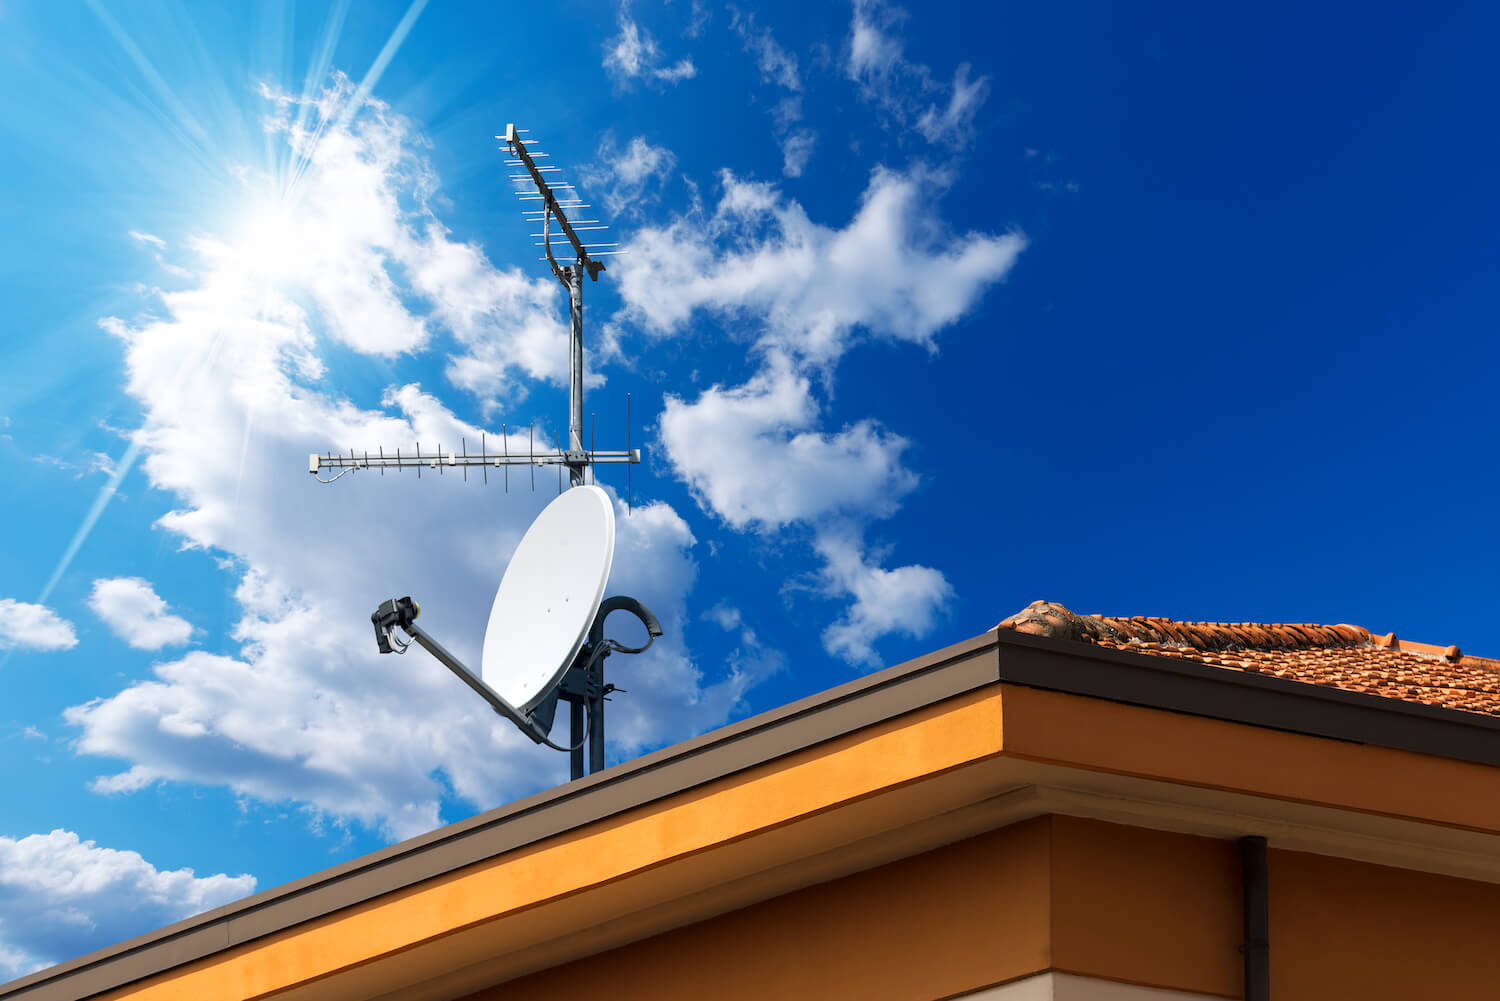 Top 3 Reasons Not To Install A Satellite Dish On Your Roof